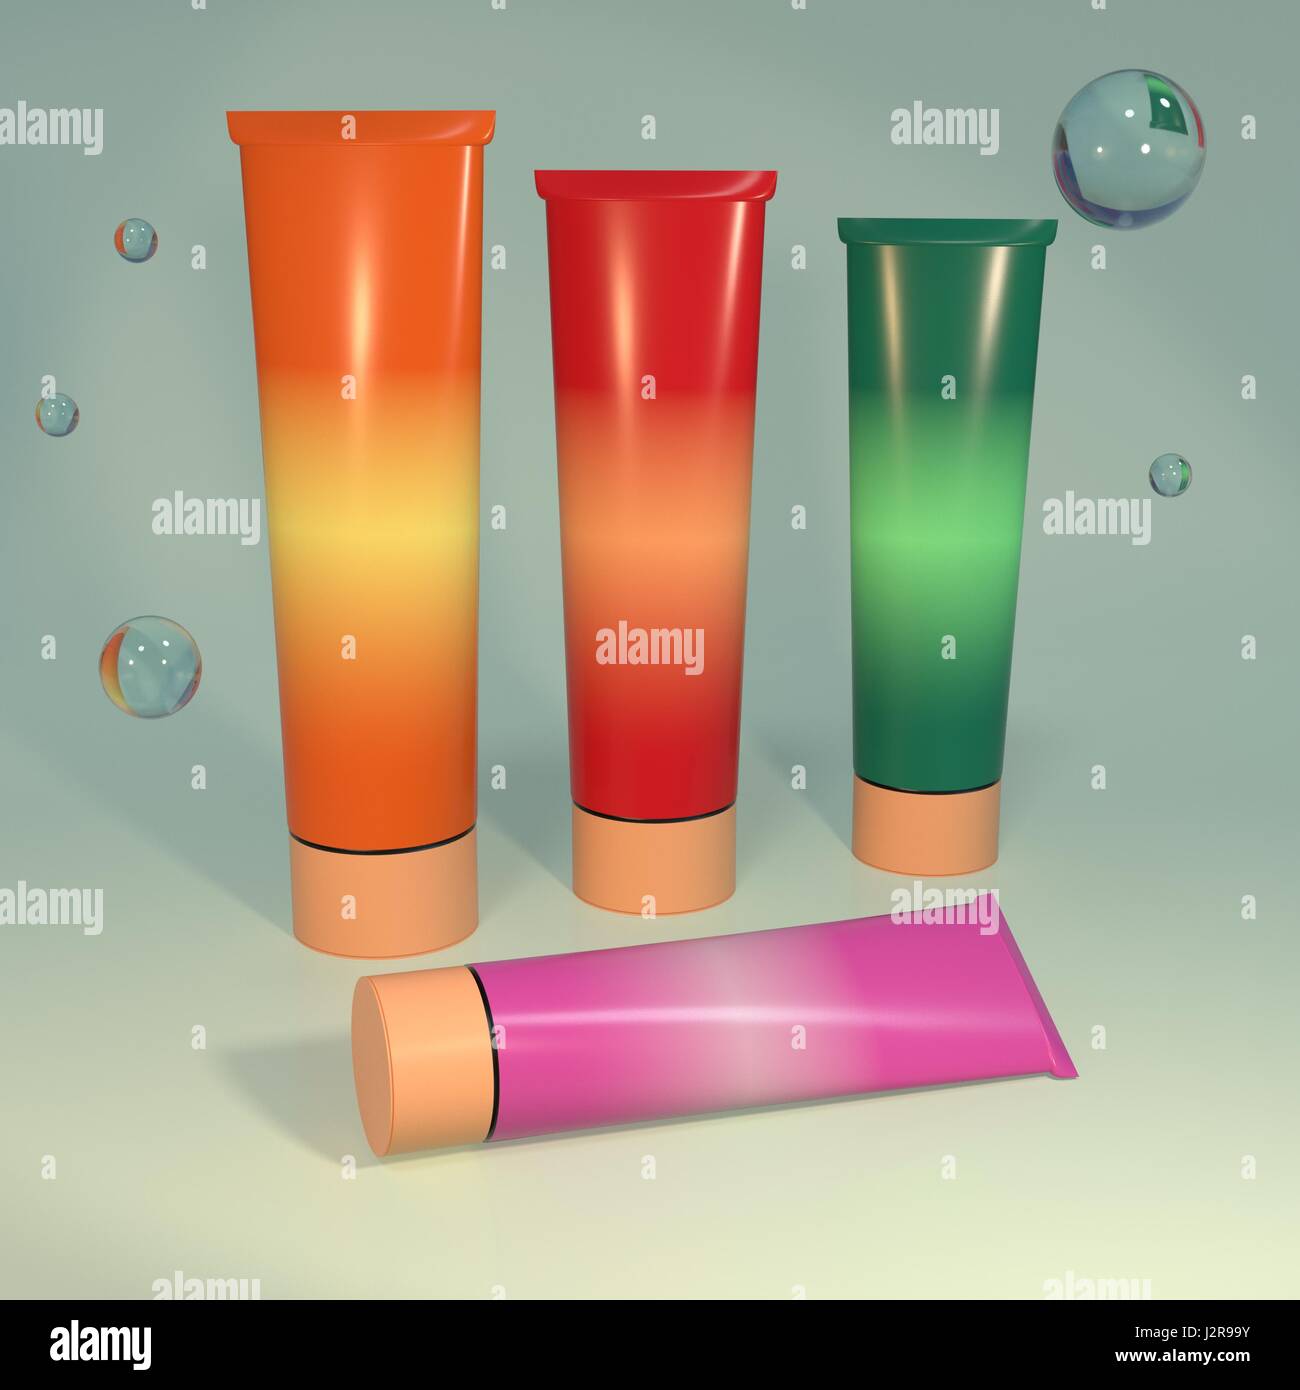 cosmetic aids products in tubes 3d illustration Stock Photo